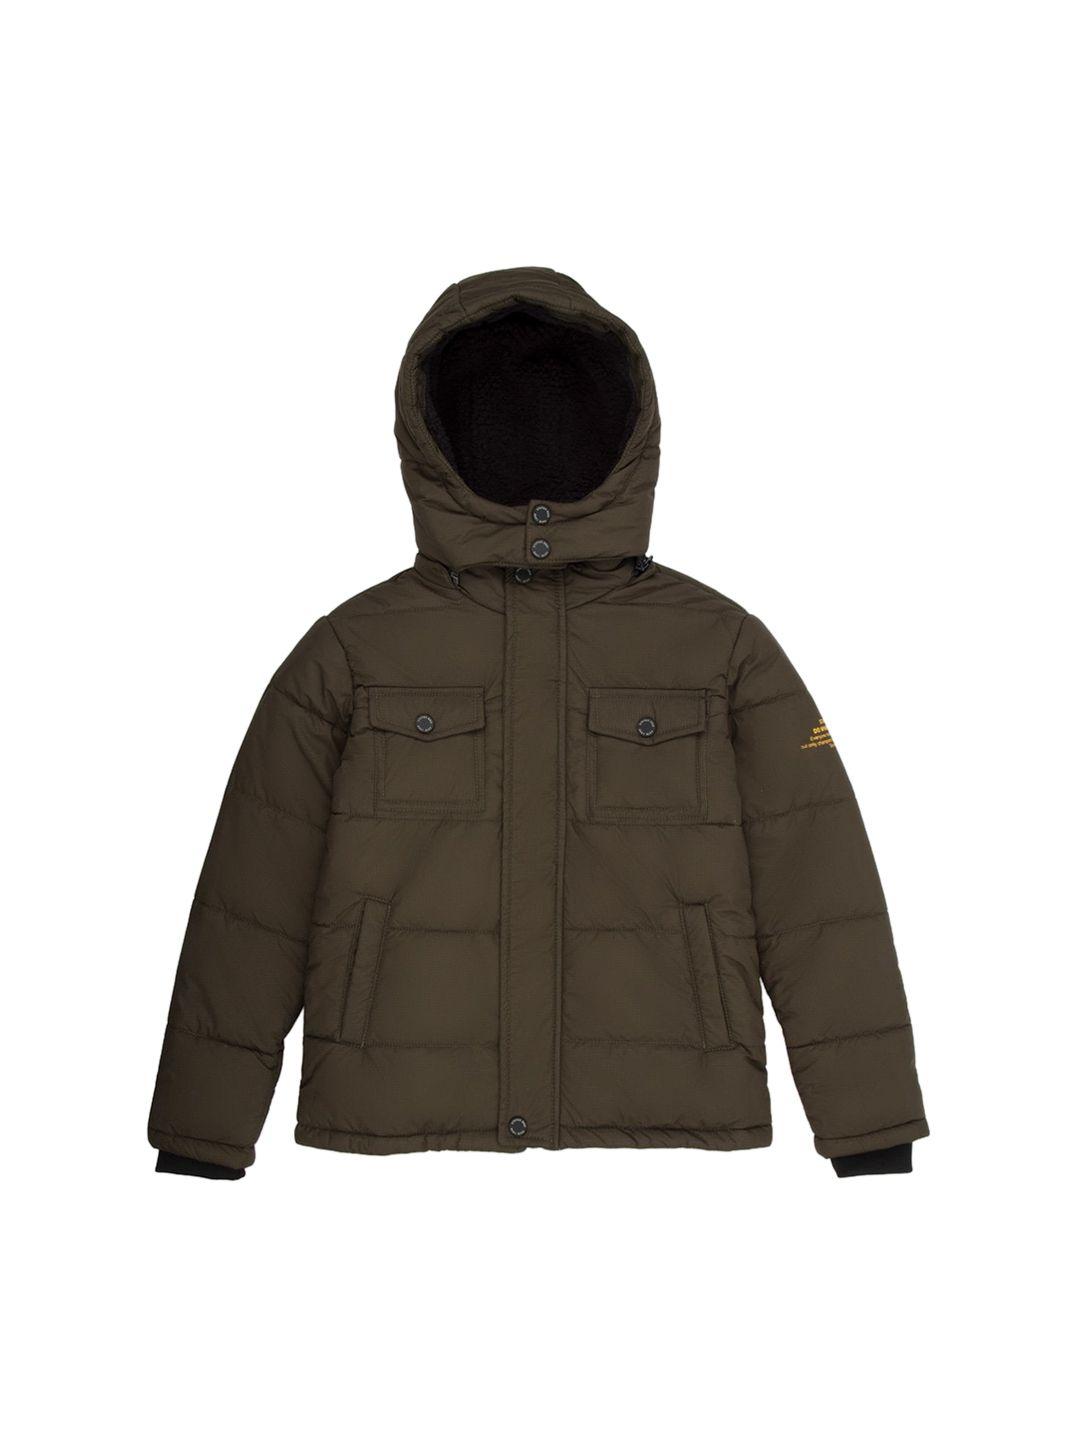 status quo boys olive green yellow padded jacket